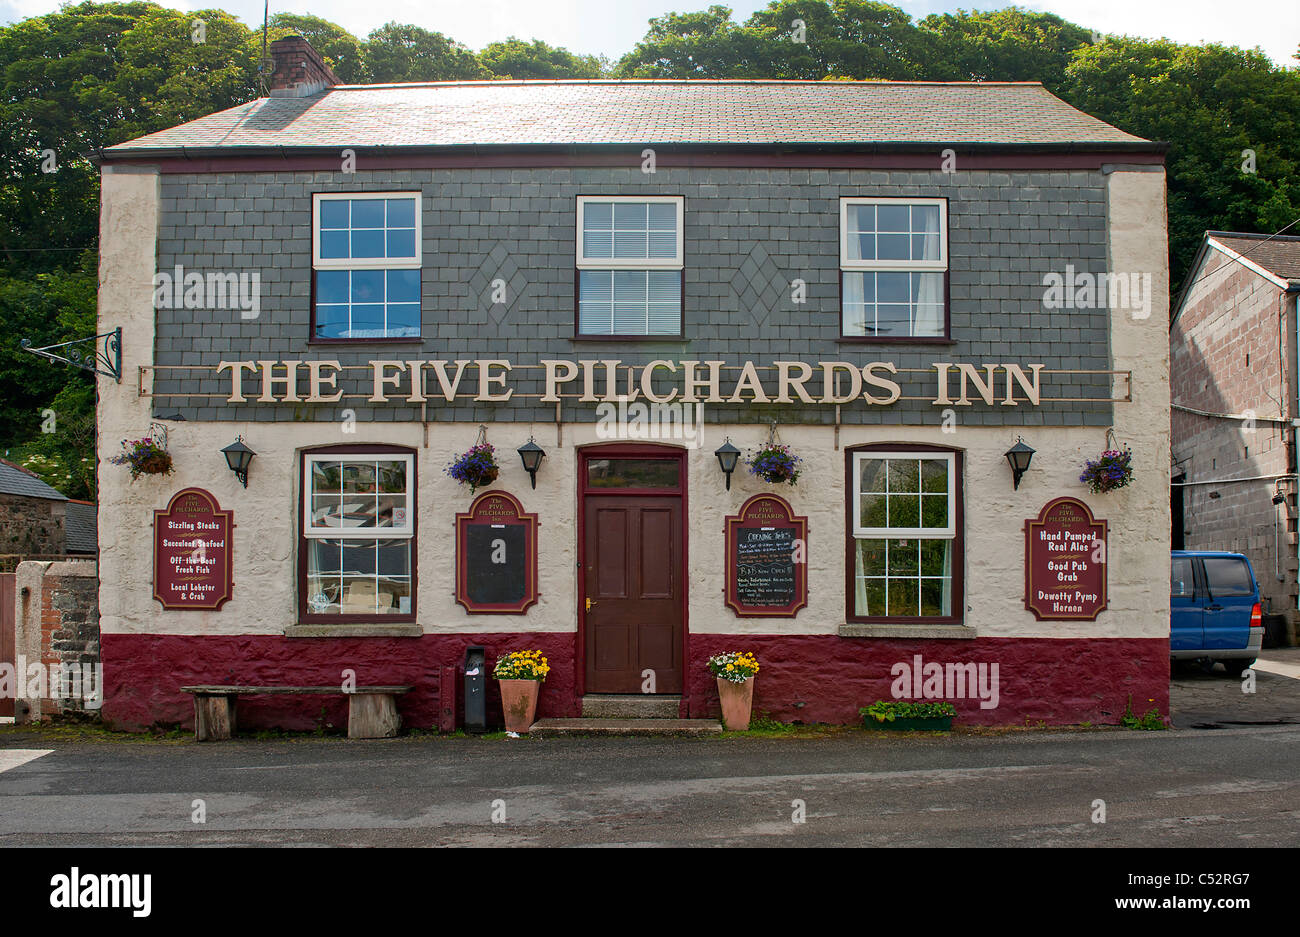 The Five Pilchards Inn, Porthallow, St. Keverne, Cornwall, England Stock Photo